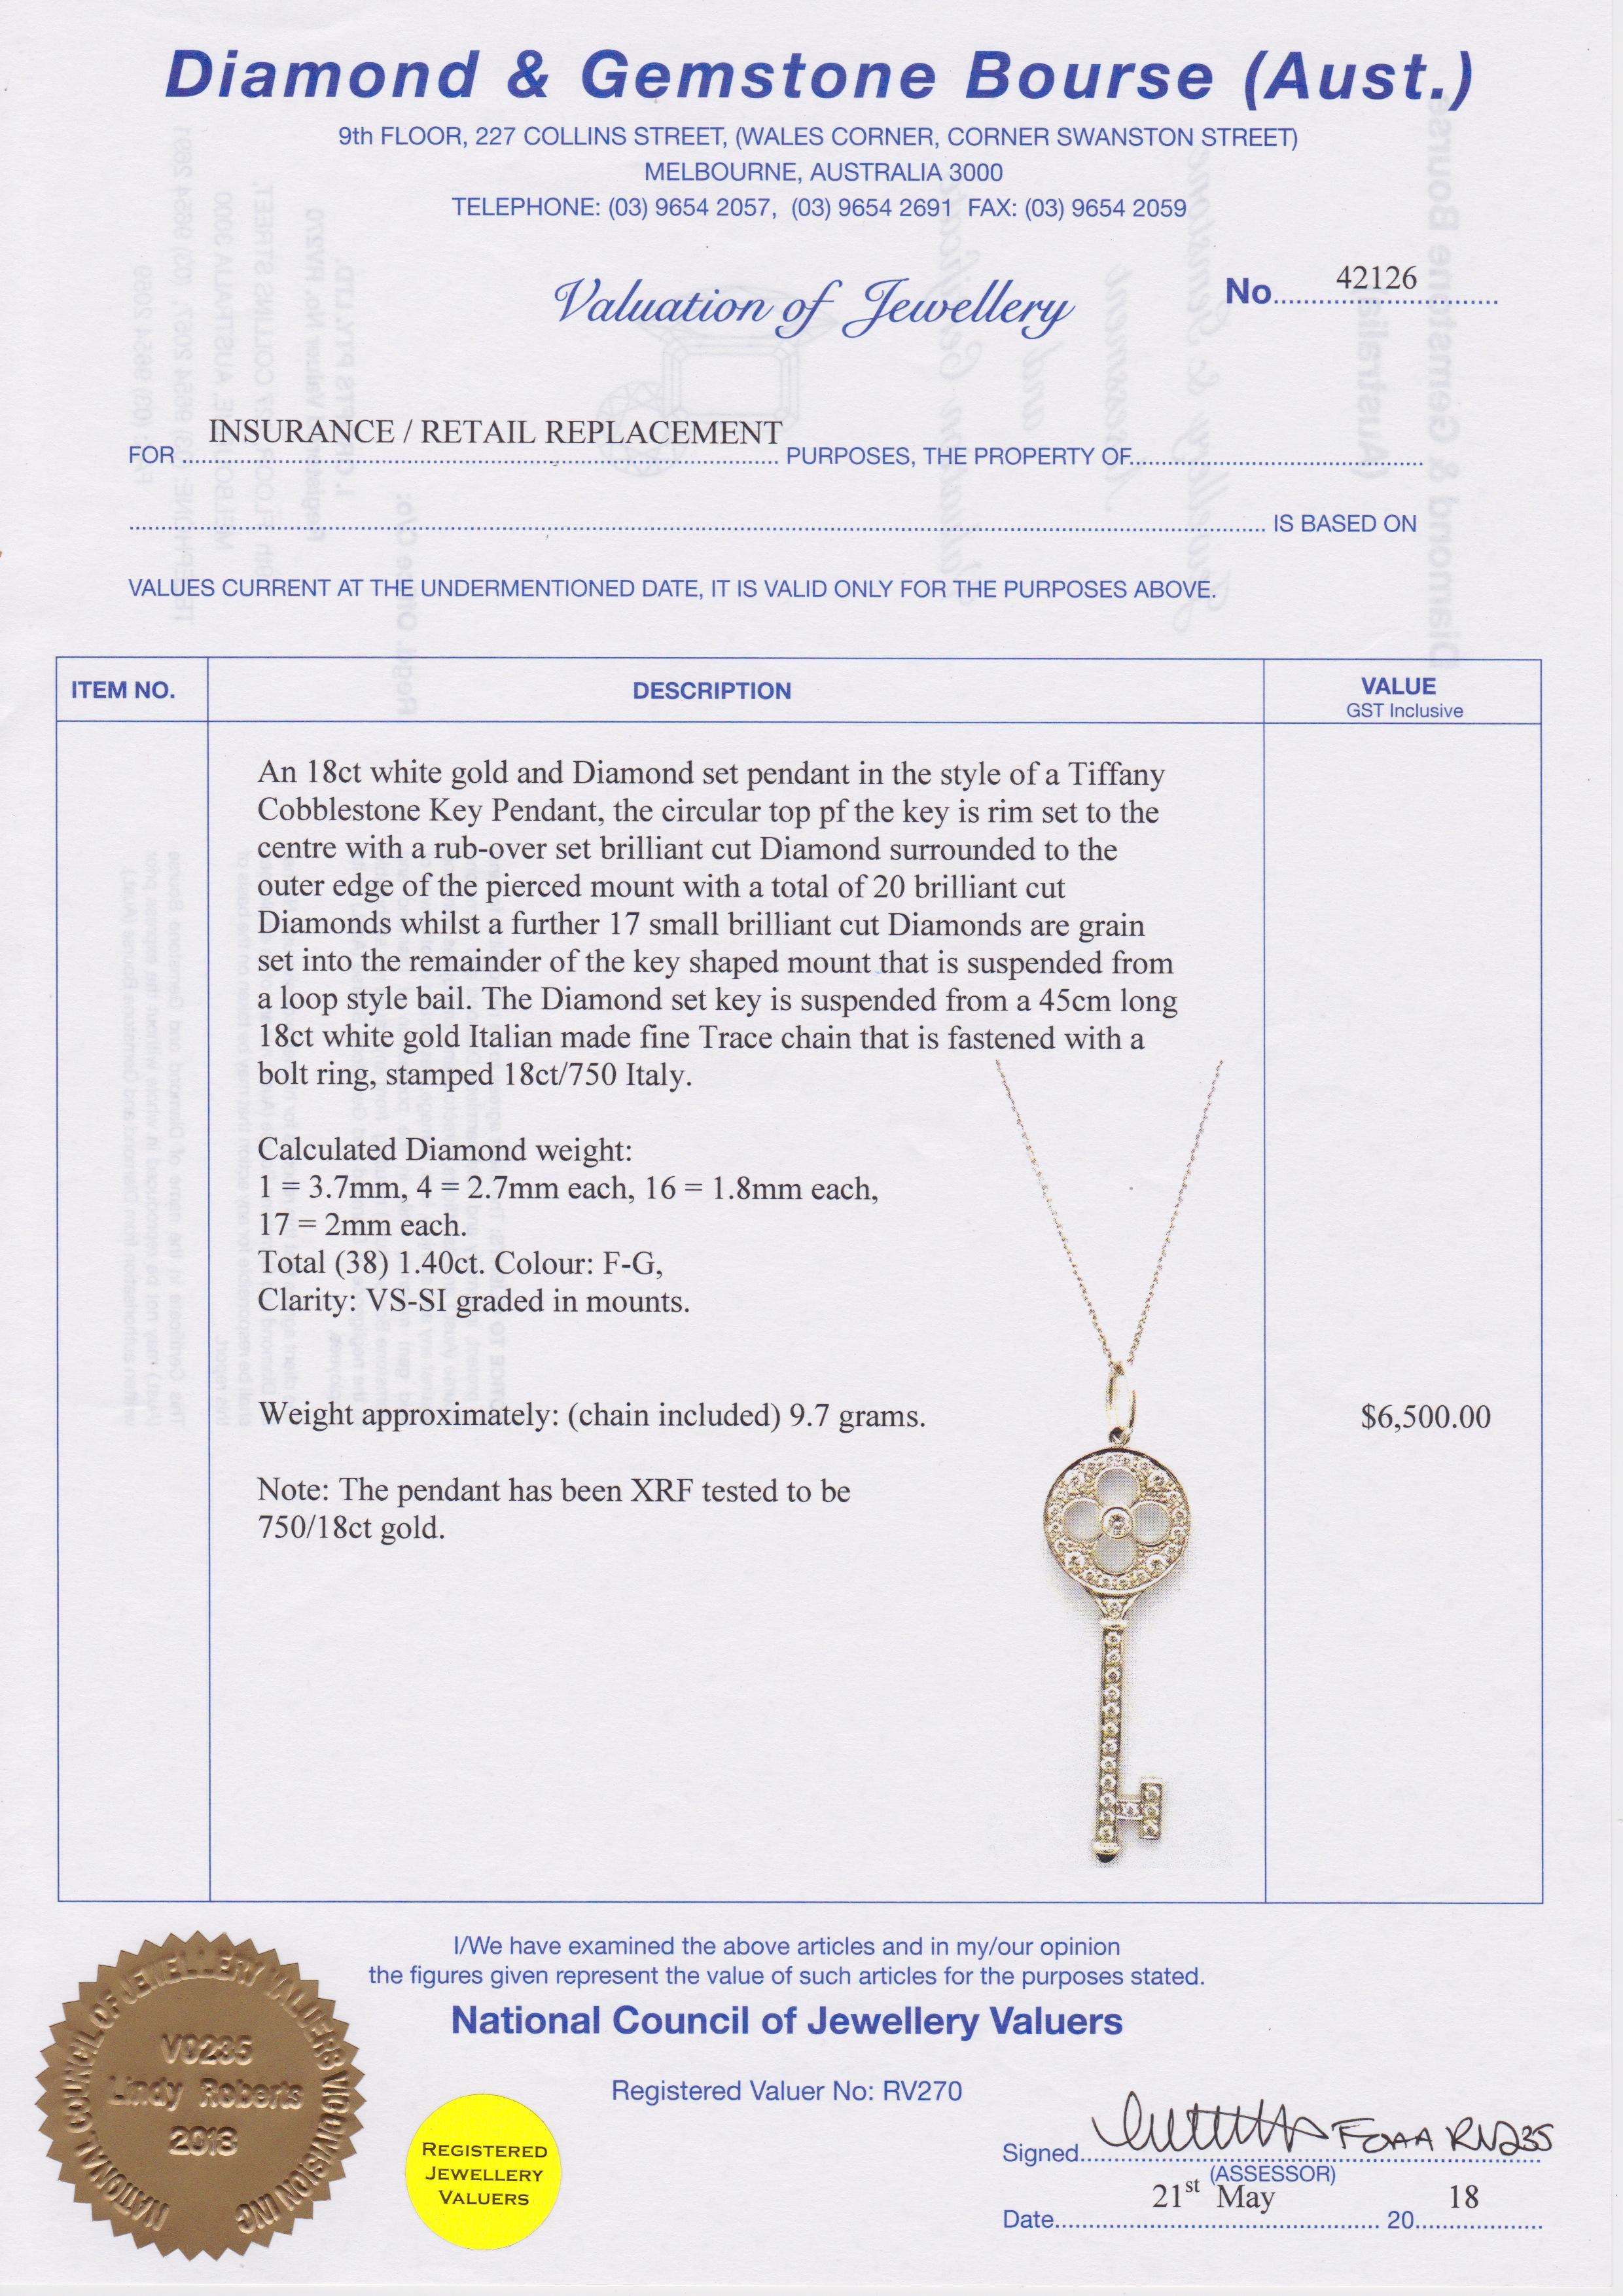 18ct White Gold Cobblestone ‘Key’ pendant set with 20 brilliant cut diamonds necklace, styled after Tiffany.  Another 17 small brilliant cut diamonds, a total of 1.40ct of diamonds. The key is suspended from a 45 cm long Italian 18ct white gold